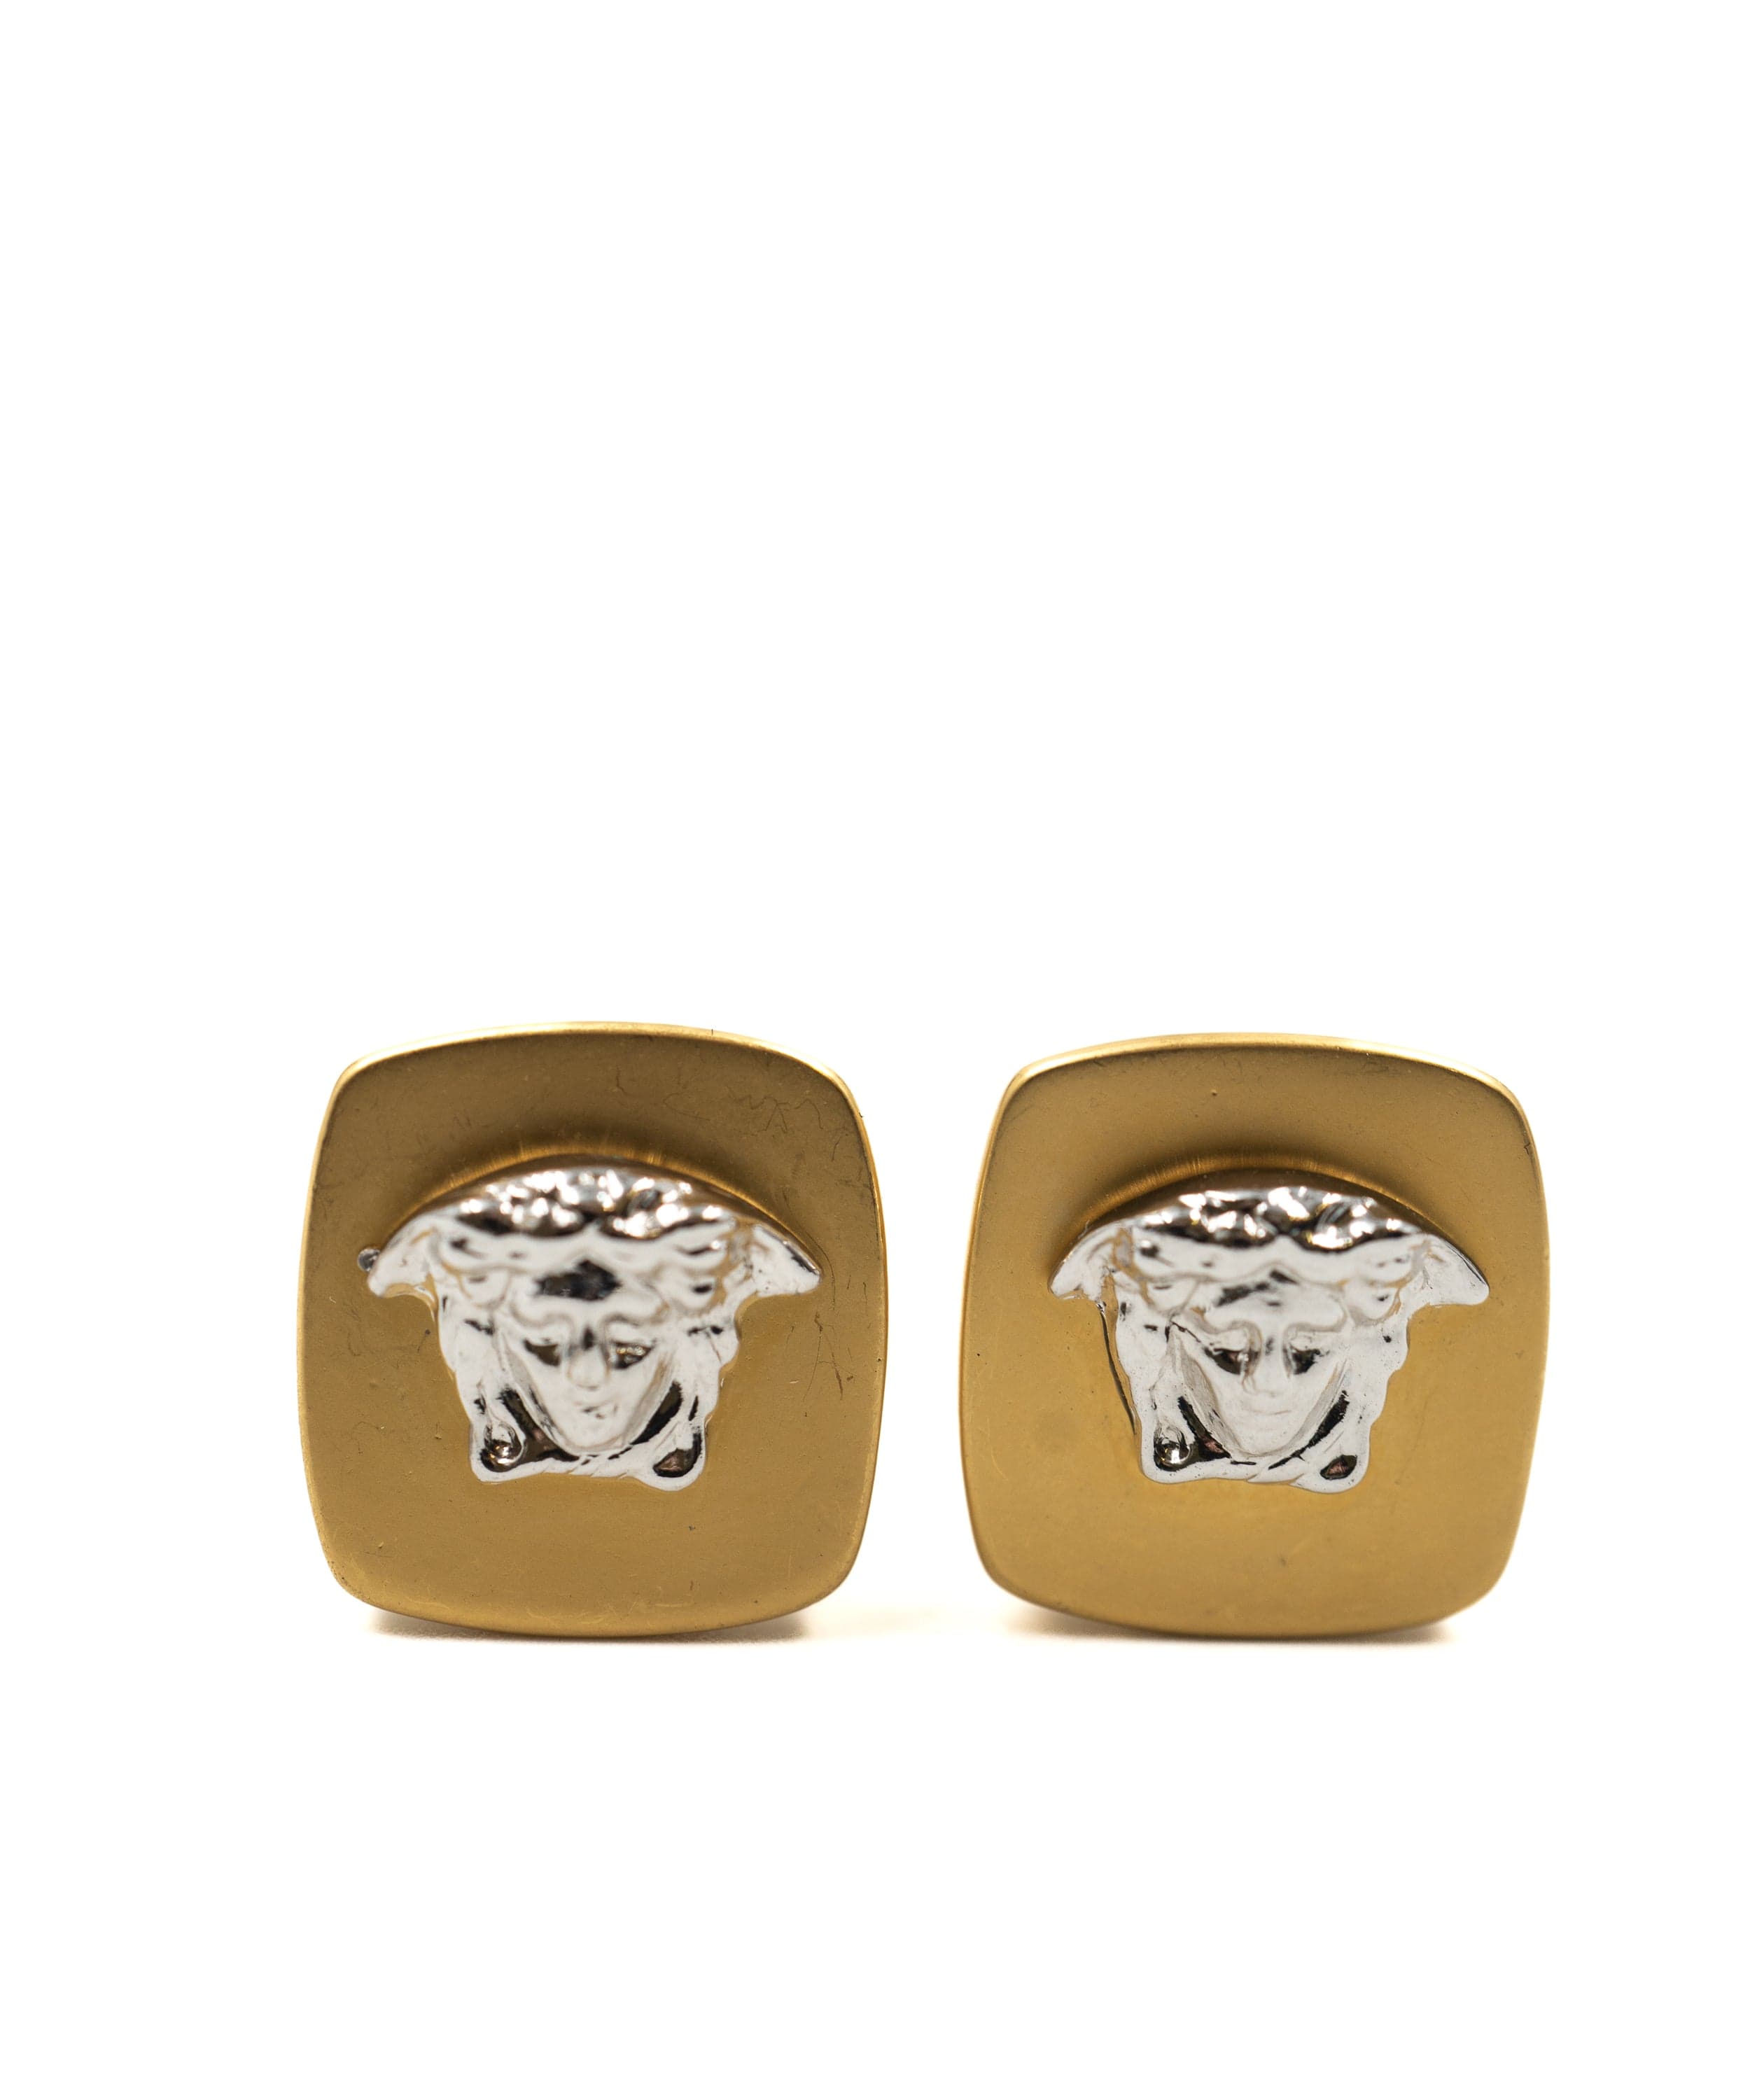 Versace Gianni Versace Silver and Gold Square Medusa Earrings - AGL1748